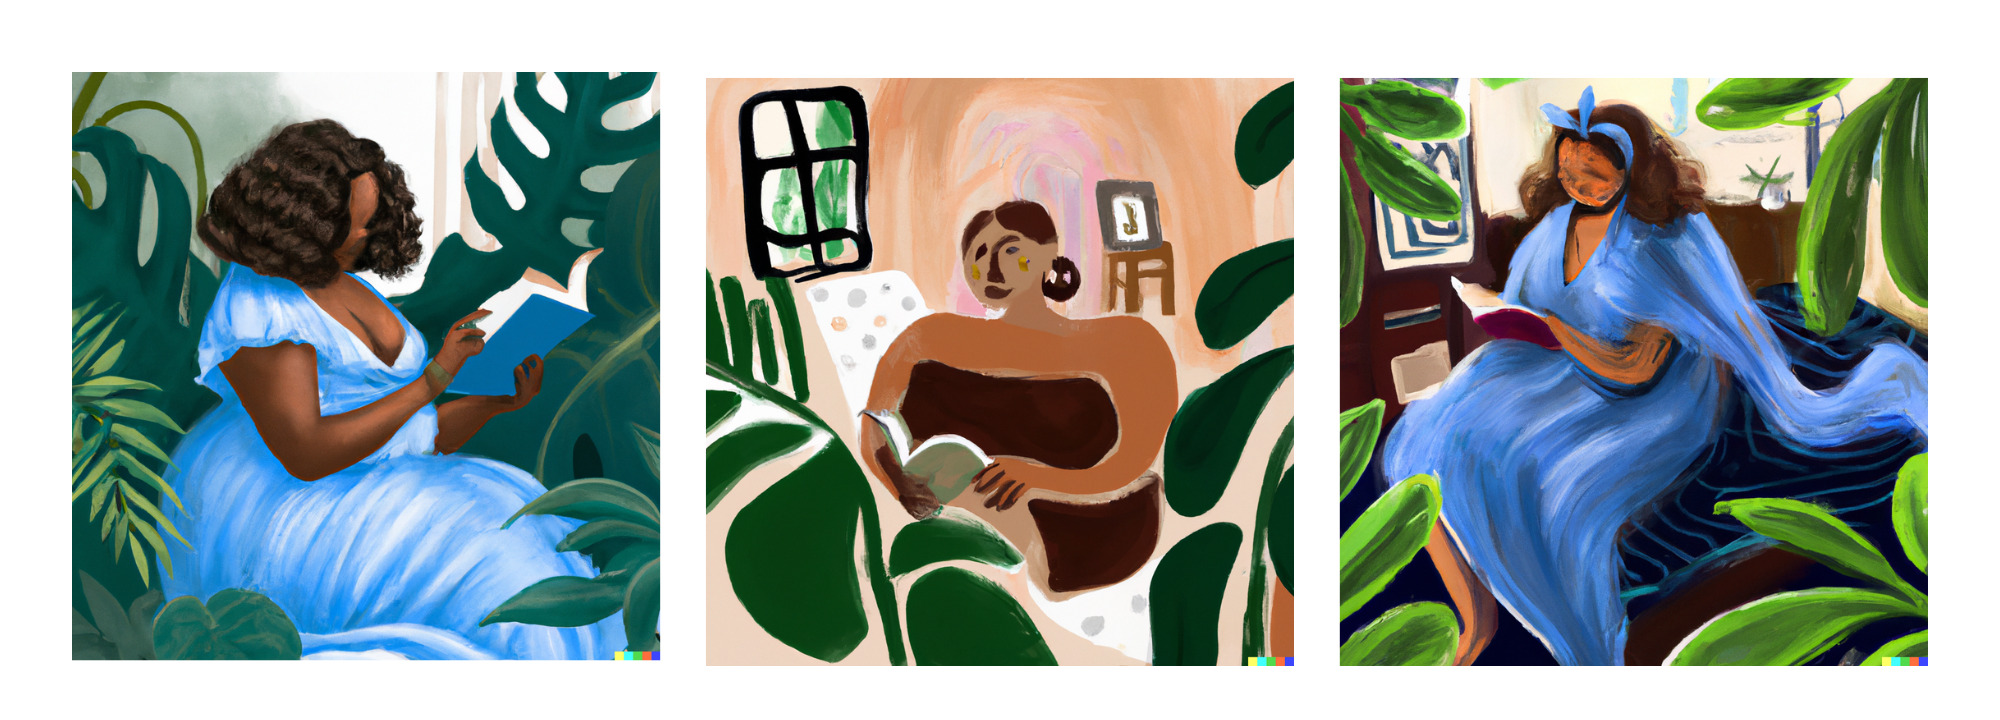 Brown-skinned woman at home, window to outside world behind her, plants around her.